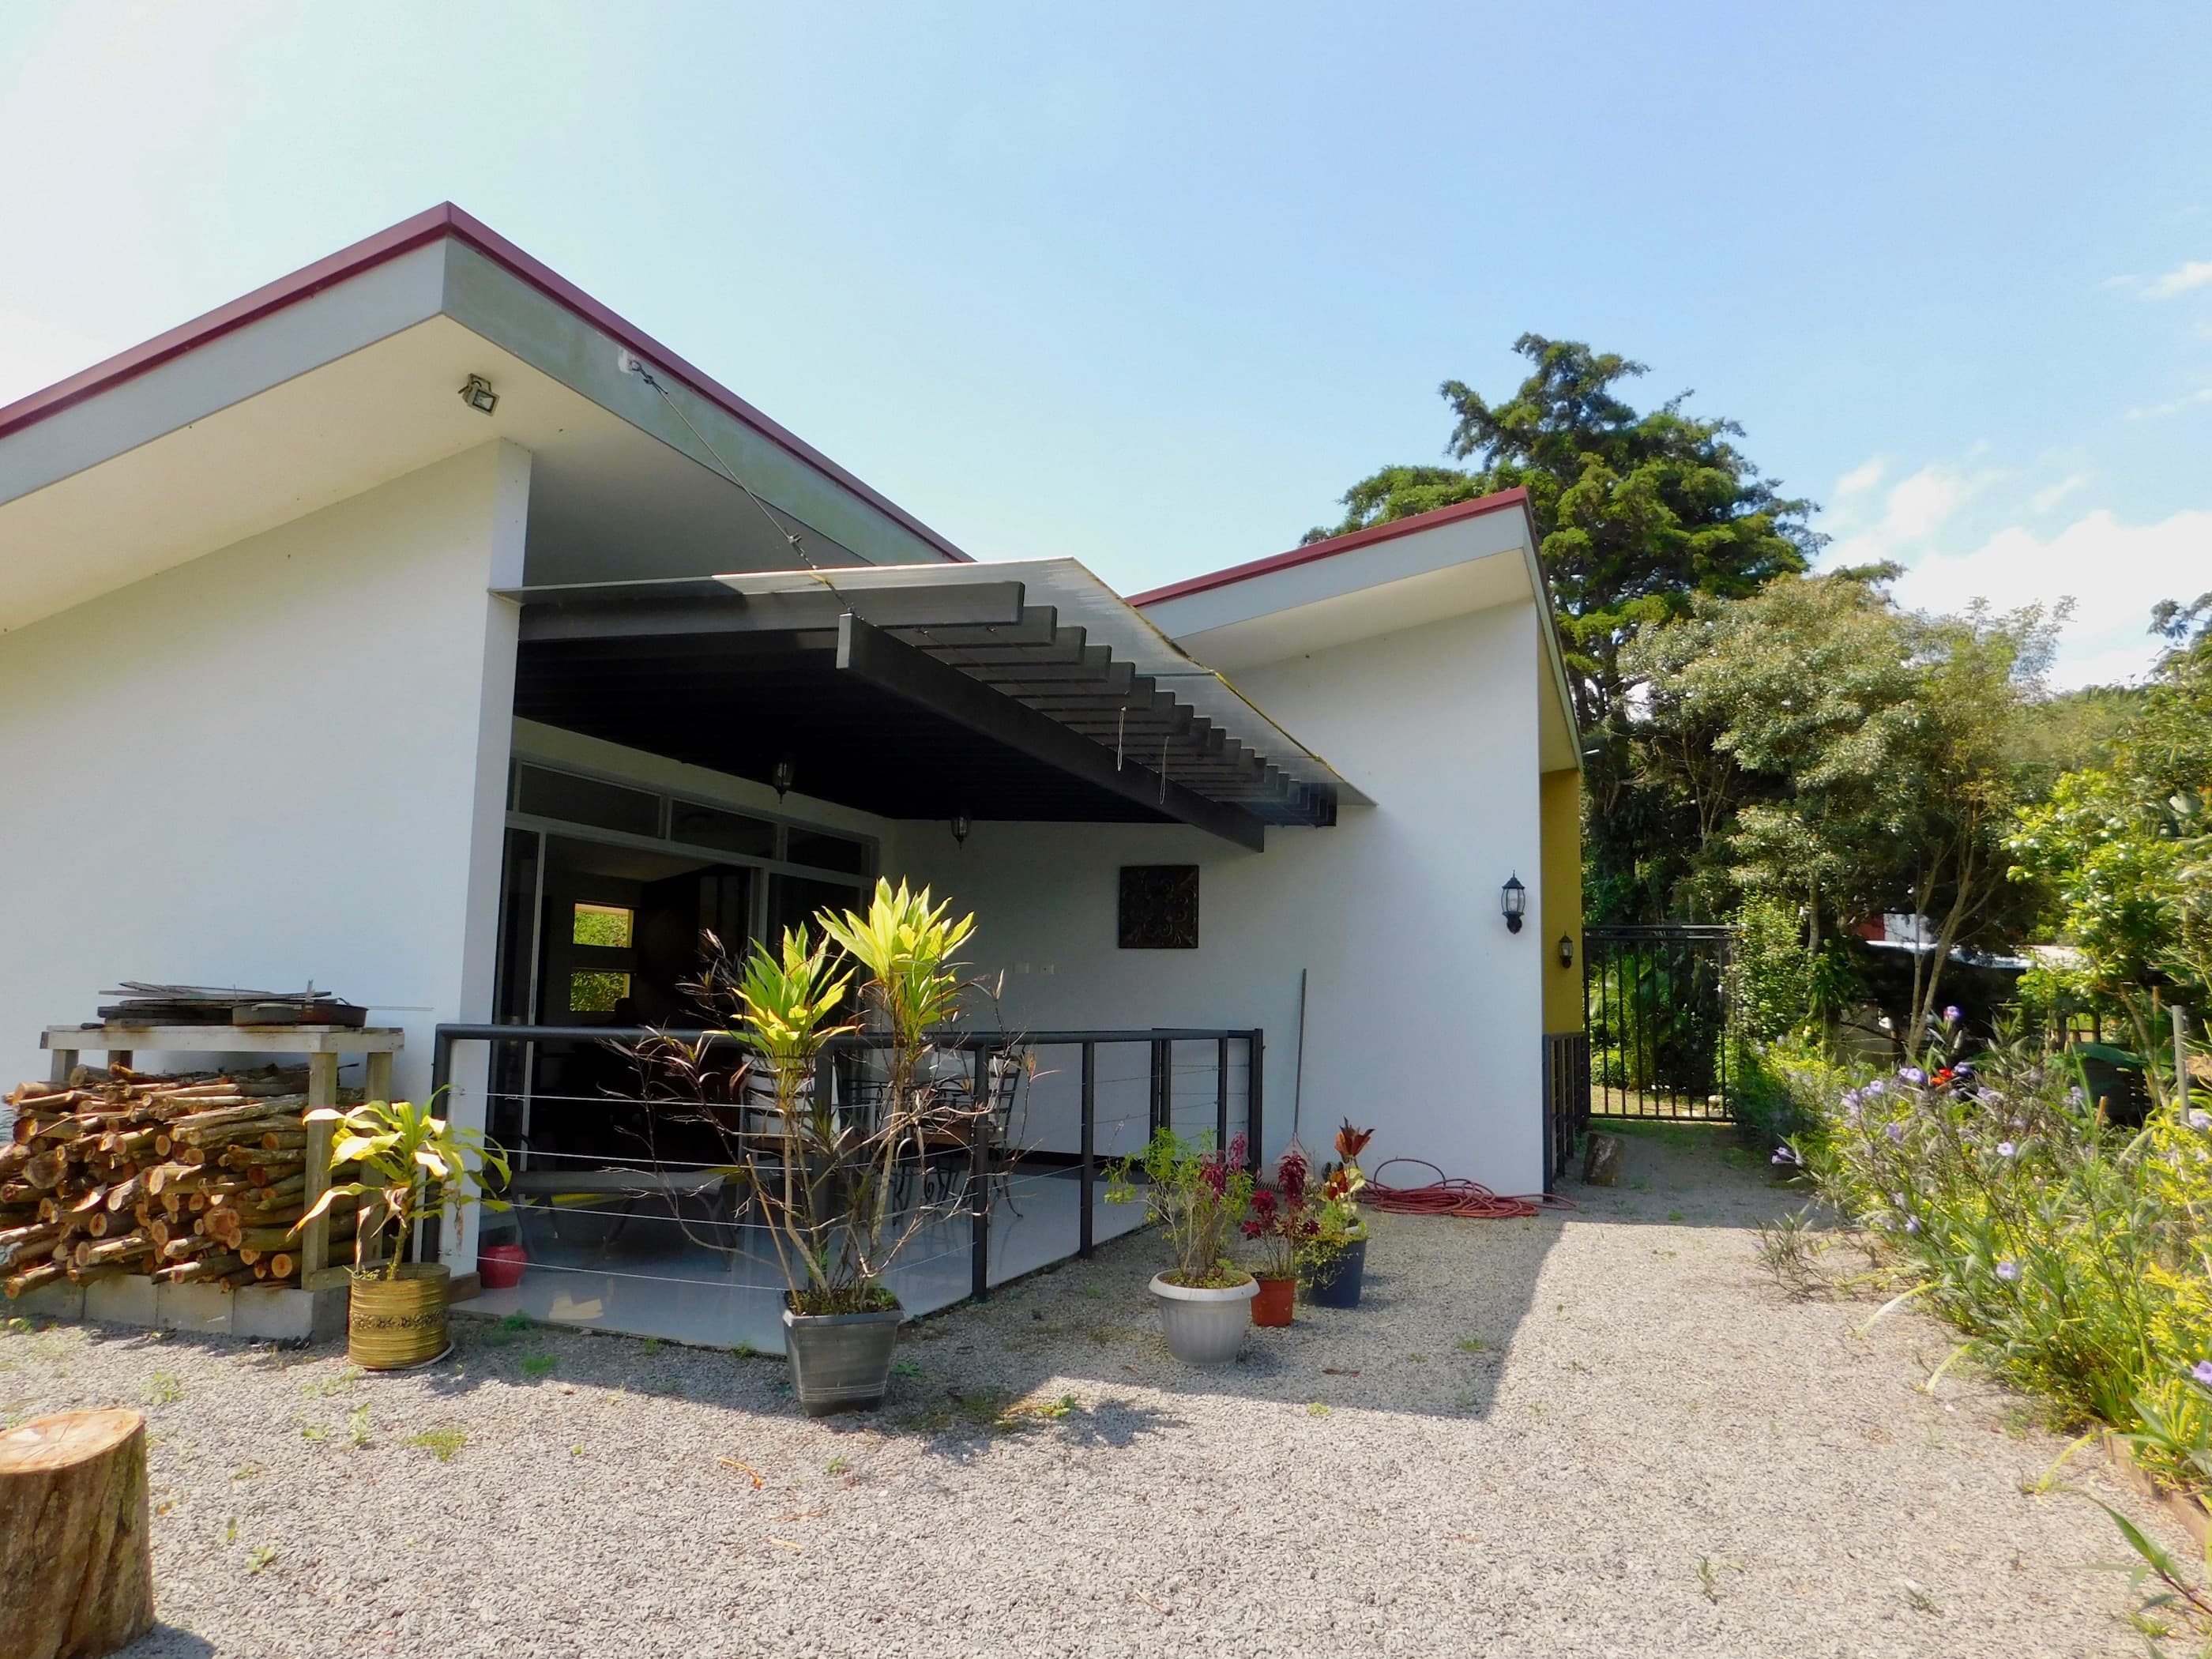 2 house compound for sale costa rica